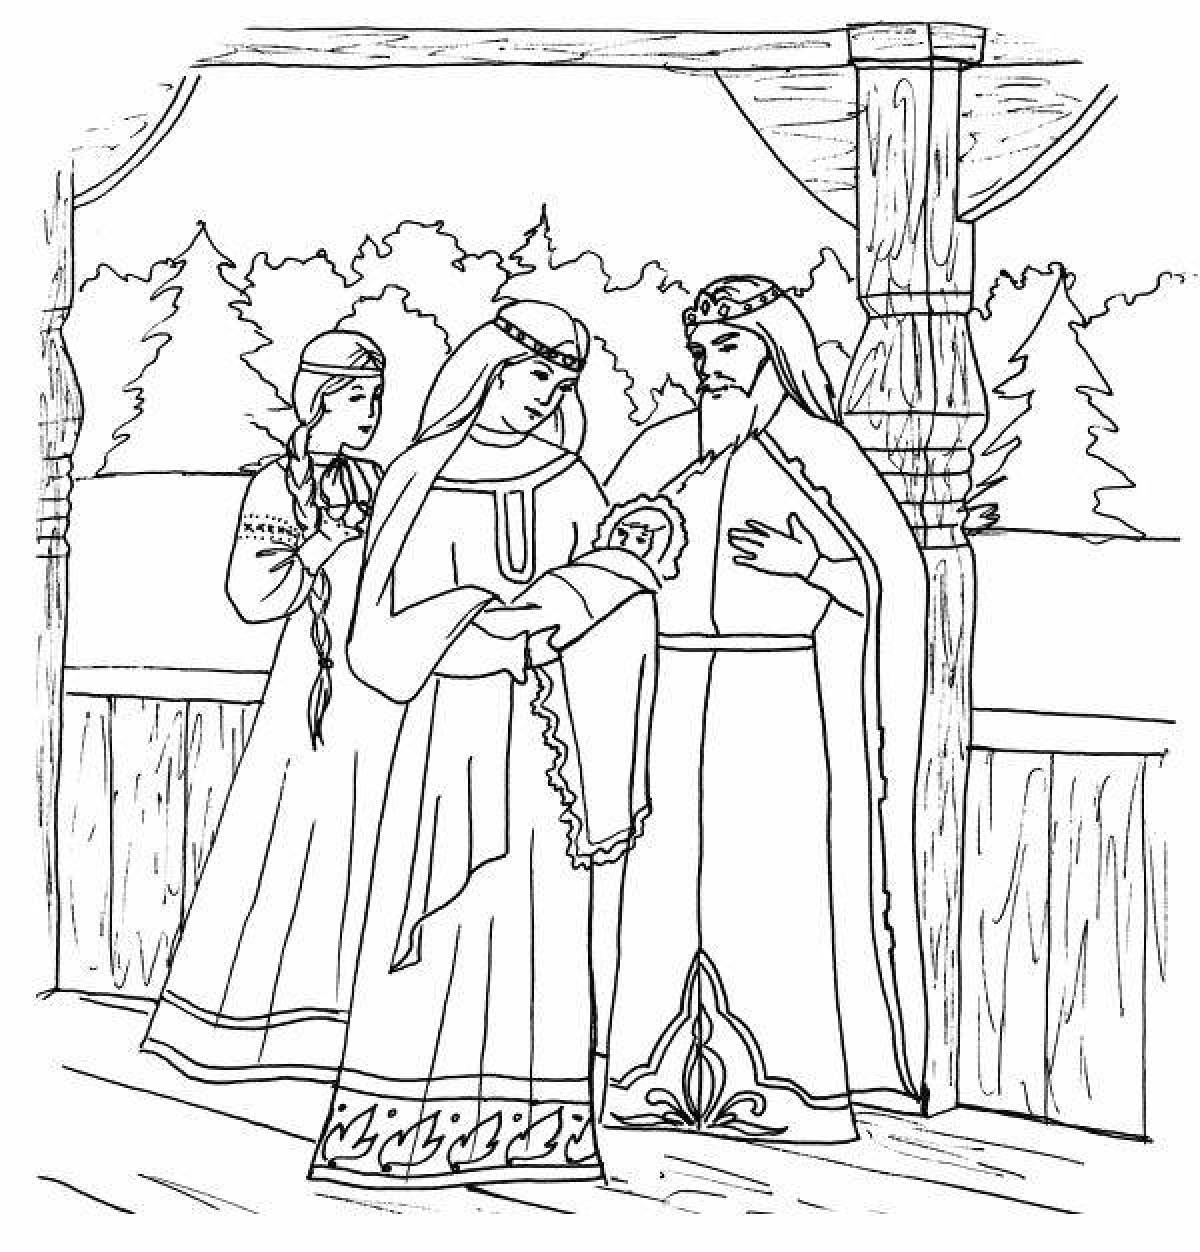 Colorful coloring book for the tale of Tsar Saltan